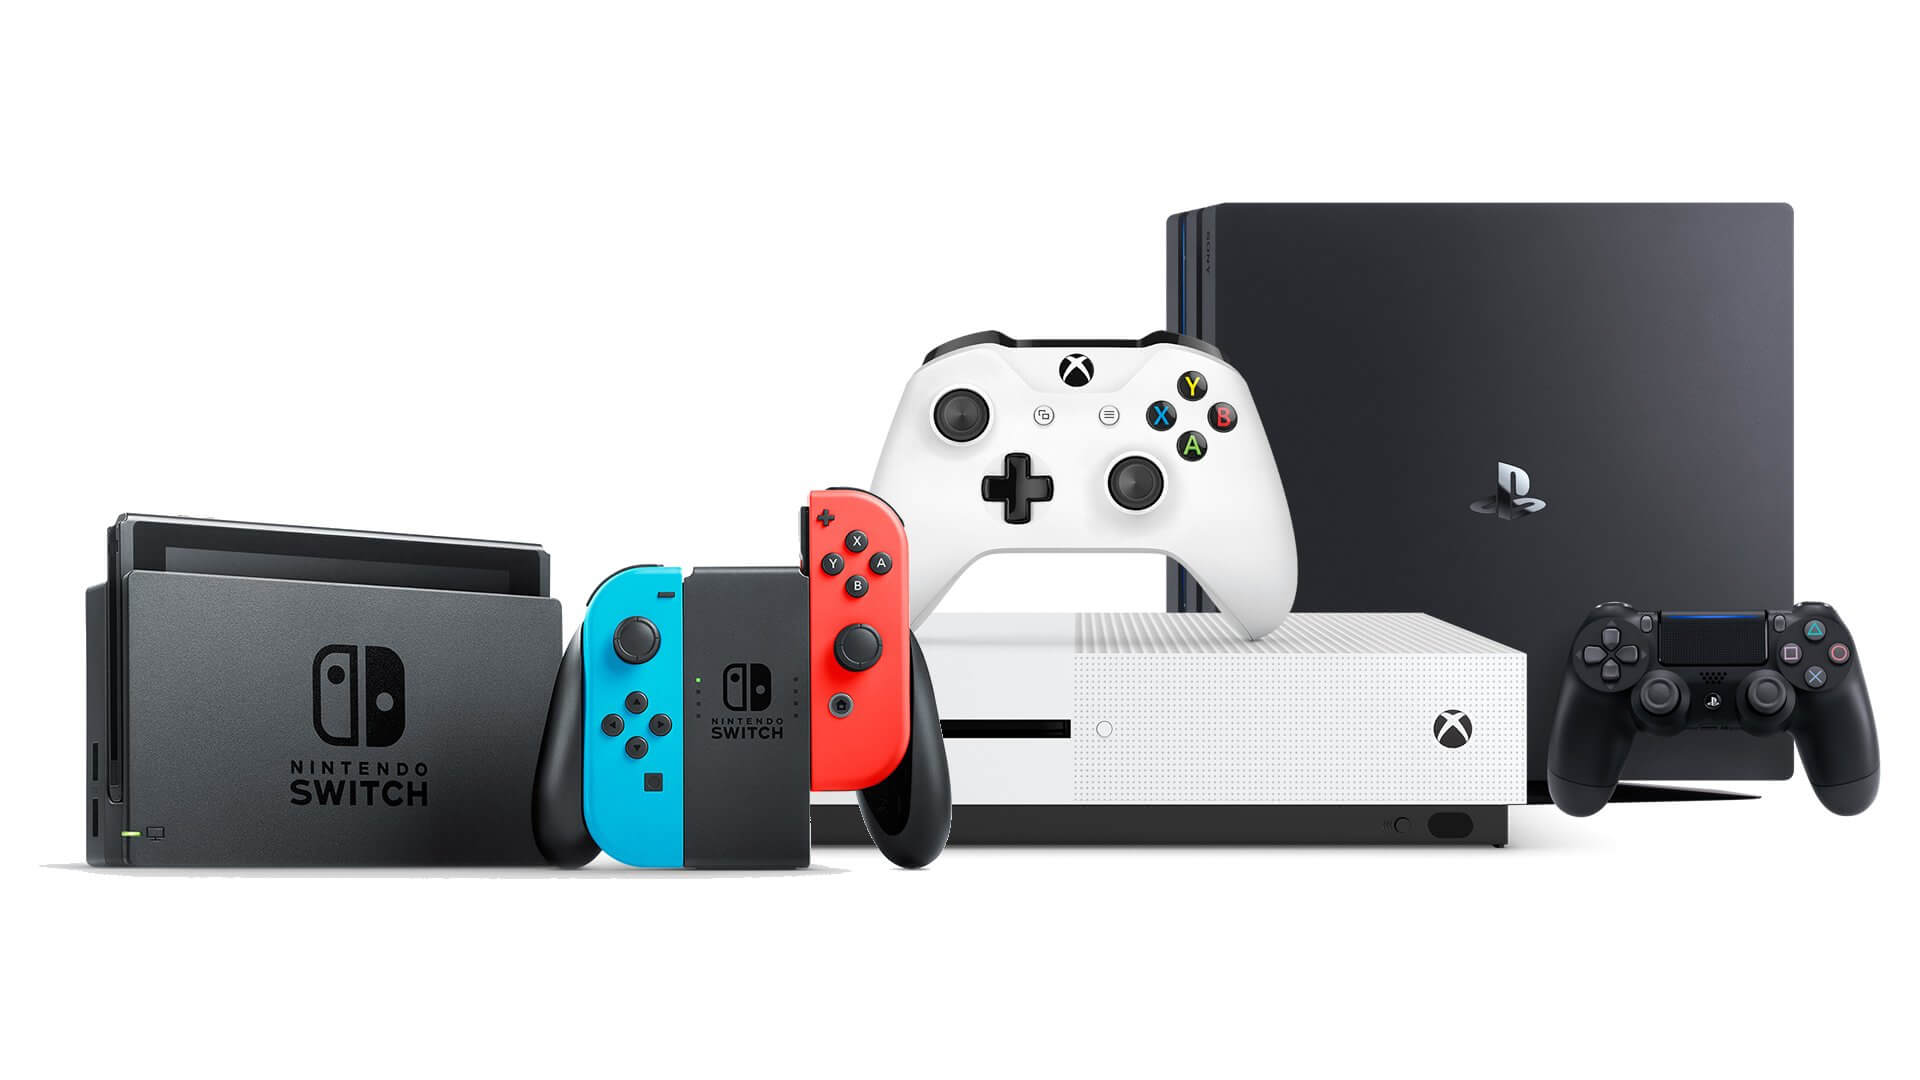 Trade agreement between US and China means no price rise for next-gen consoles